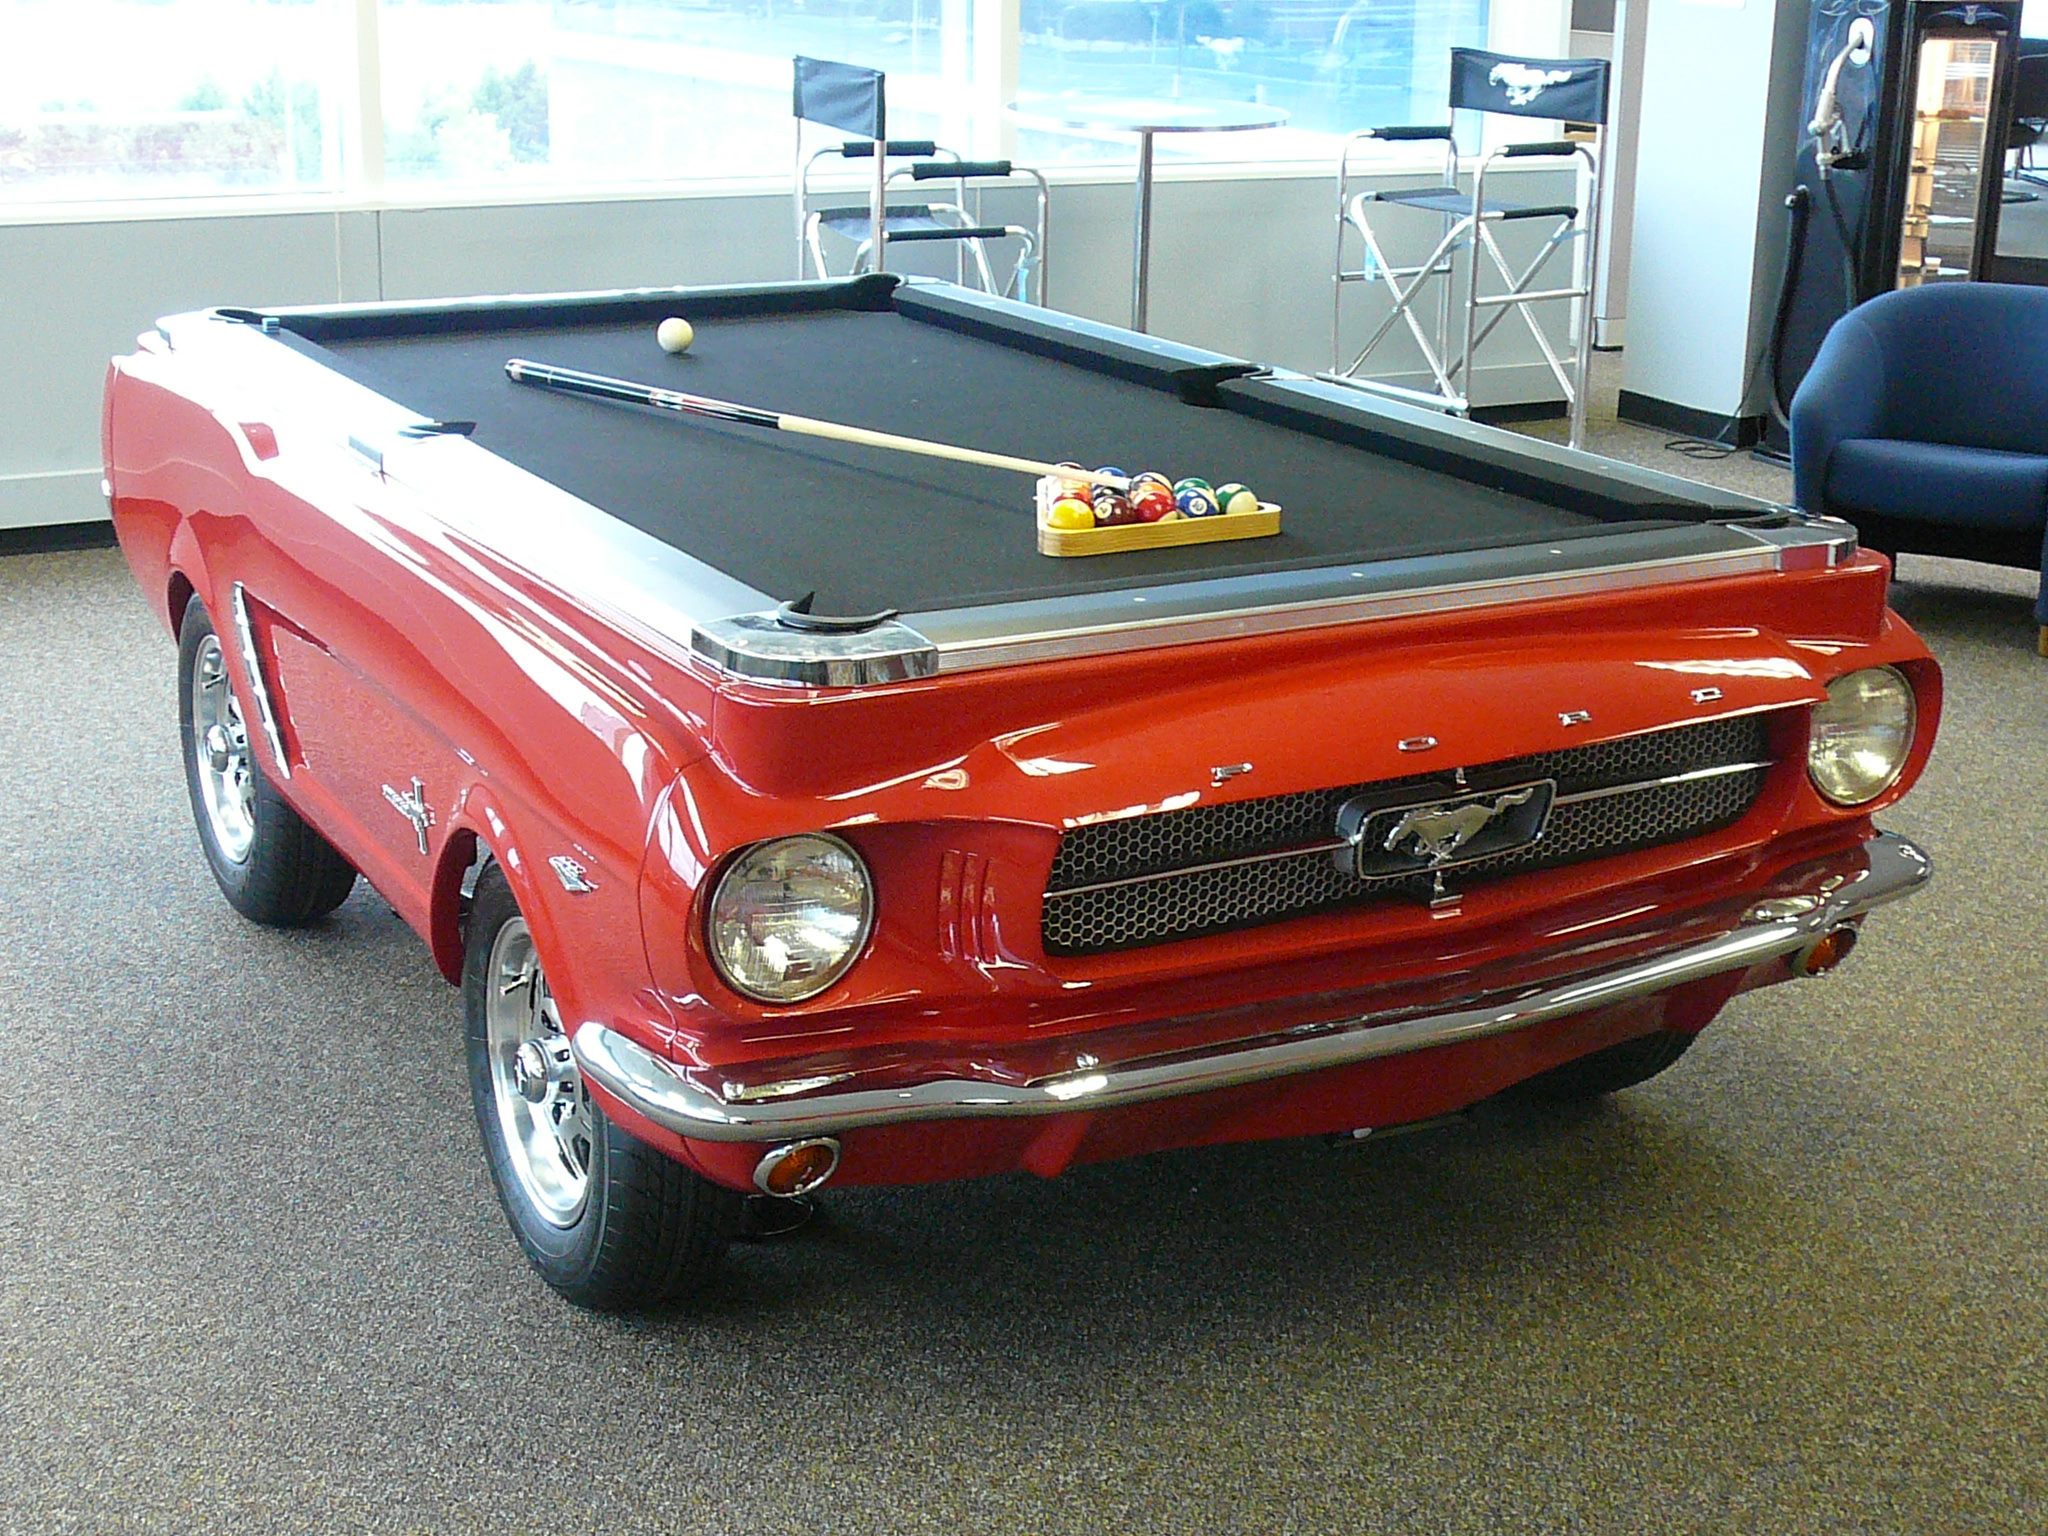 Funny Amazing Snooker Table